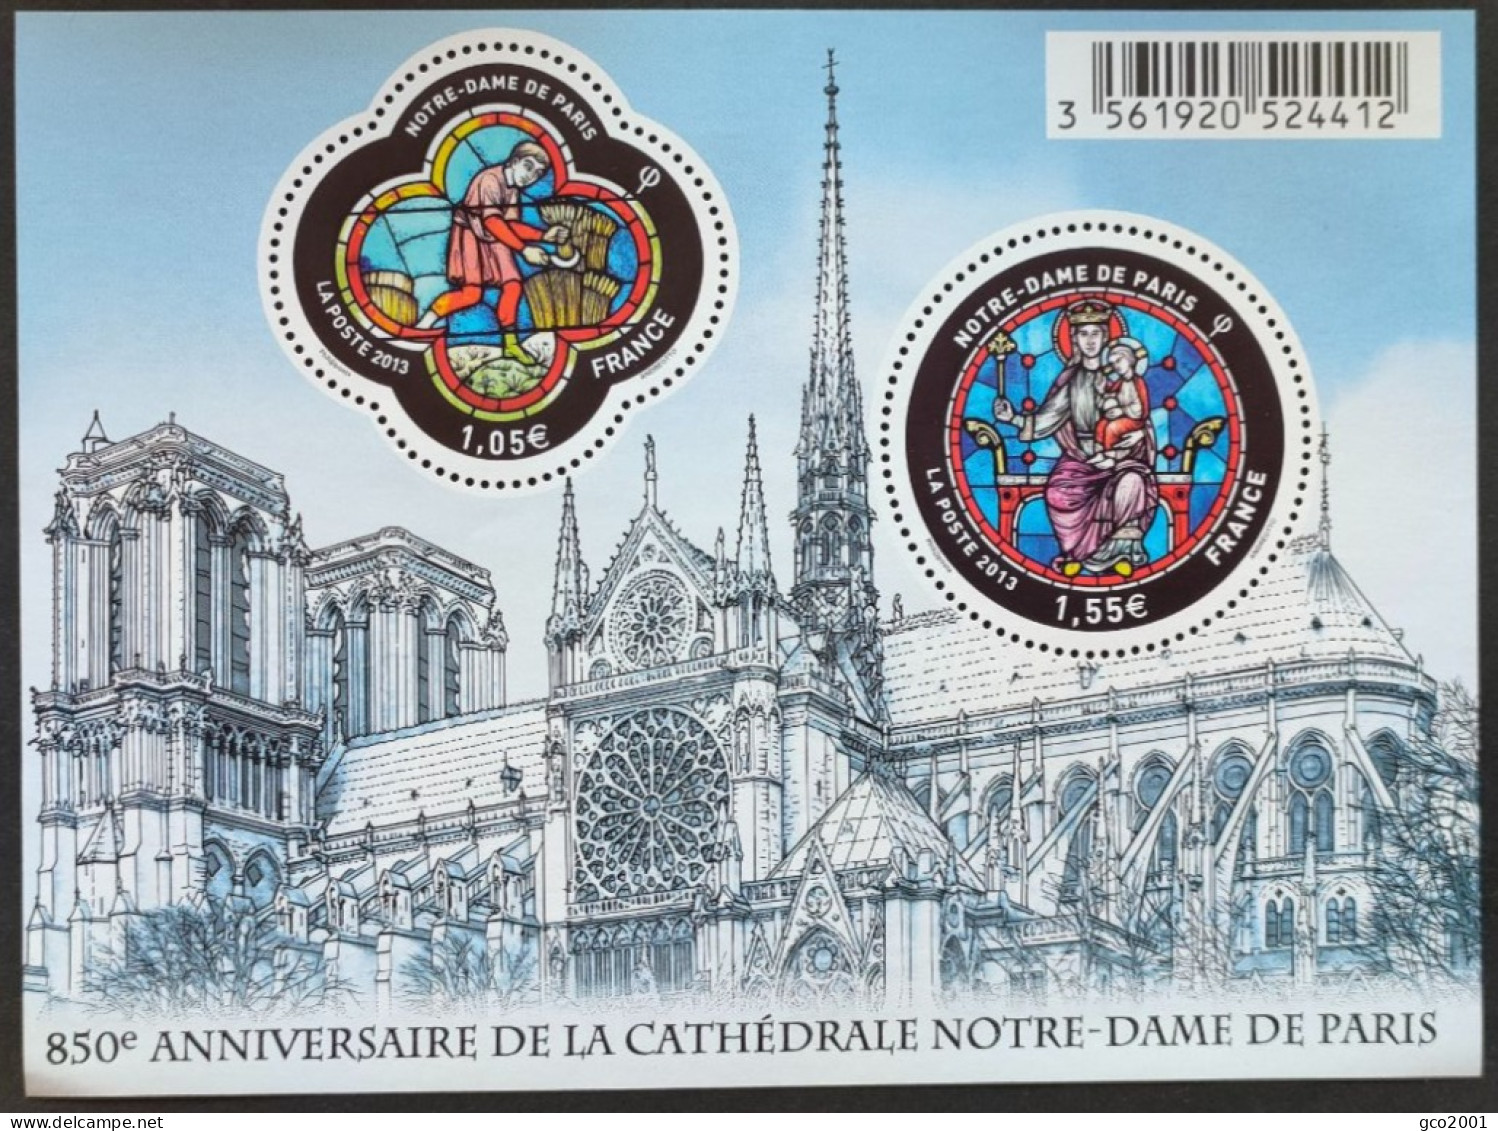 FRANCE / YT F4714 / NOTRE DAME DE PARIS - VITRAIL - CATHEDRALE / NEUF ** / MNH - 2008-2013 Marianne (Beaujard)